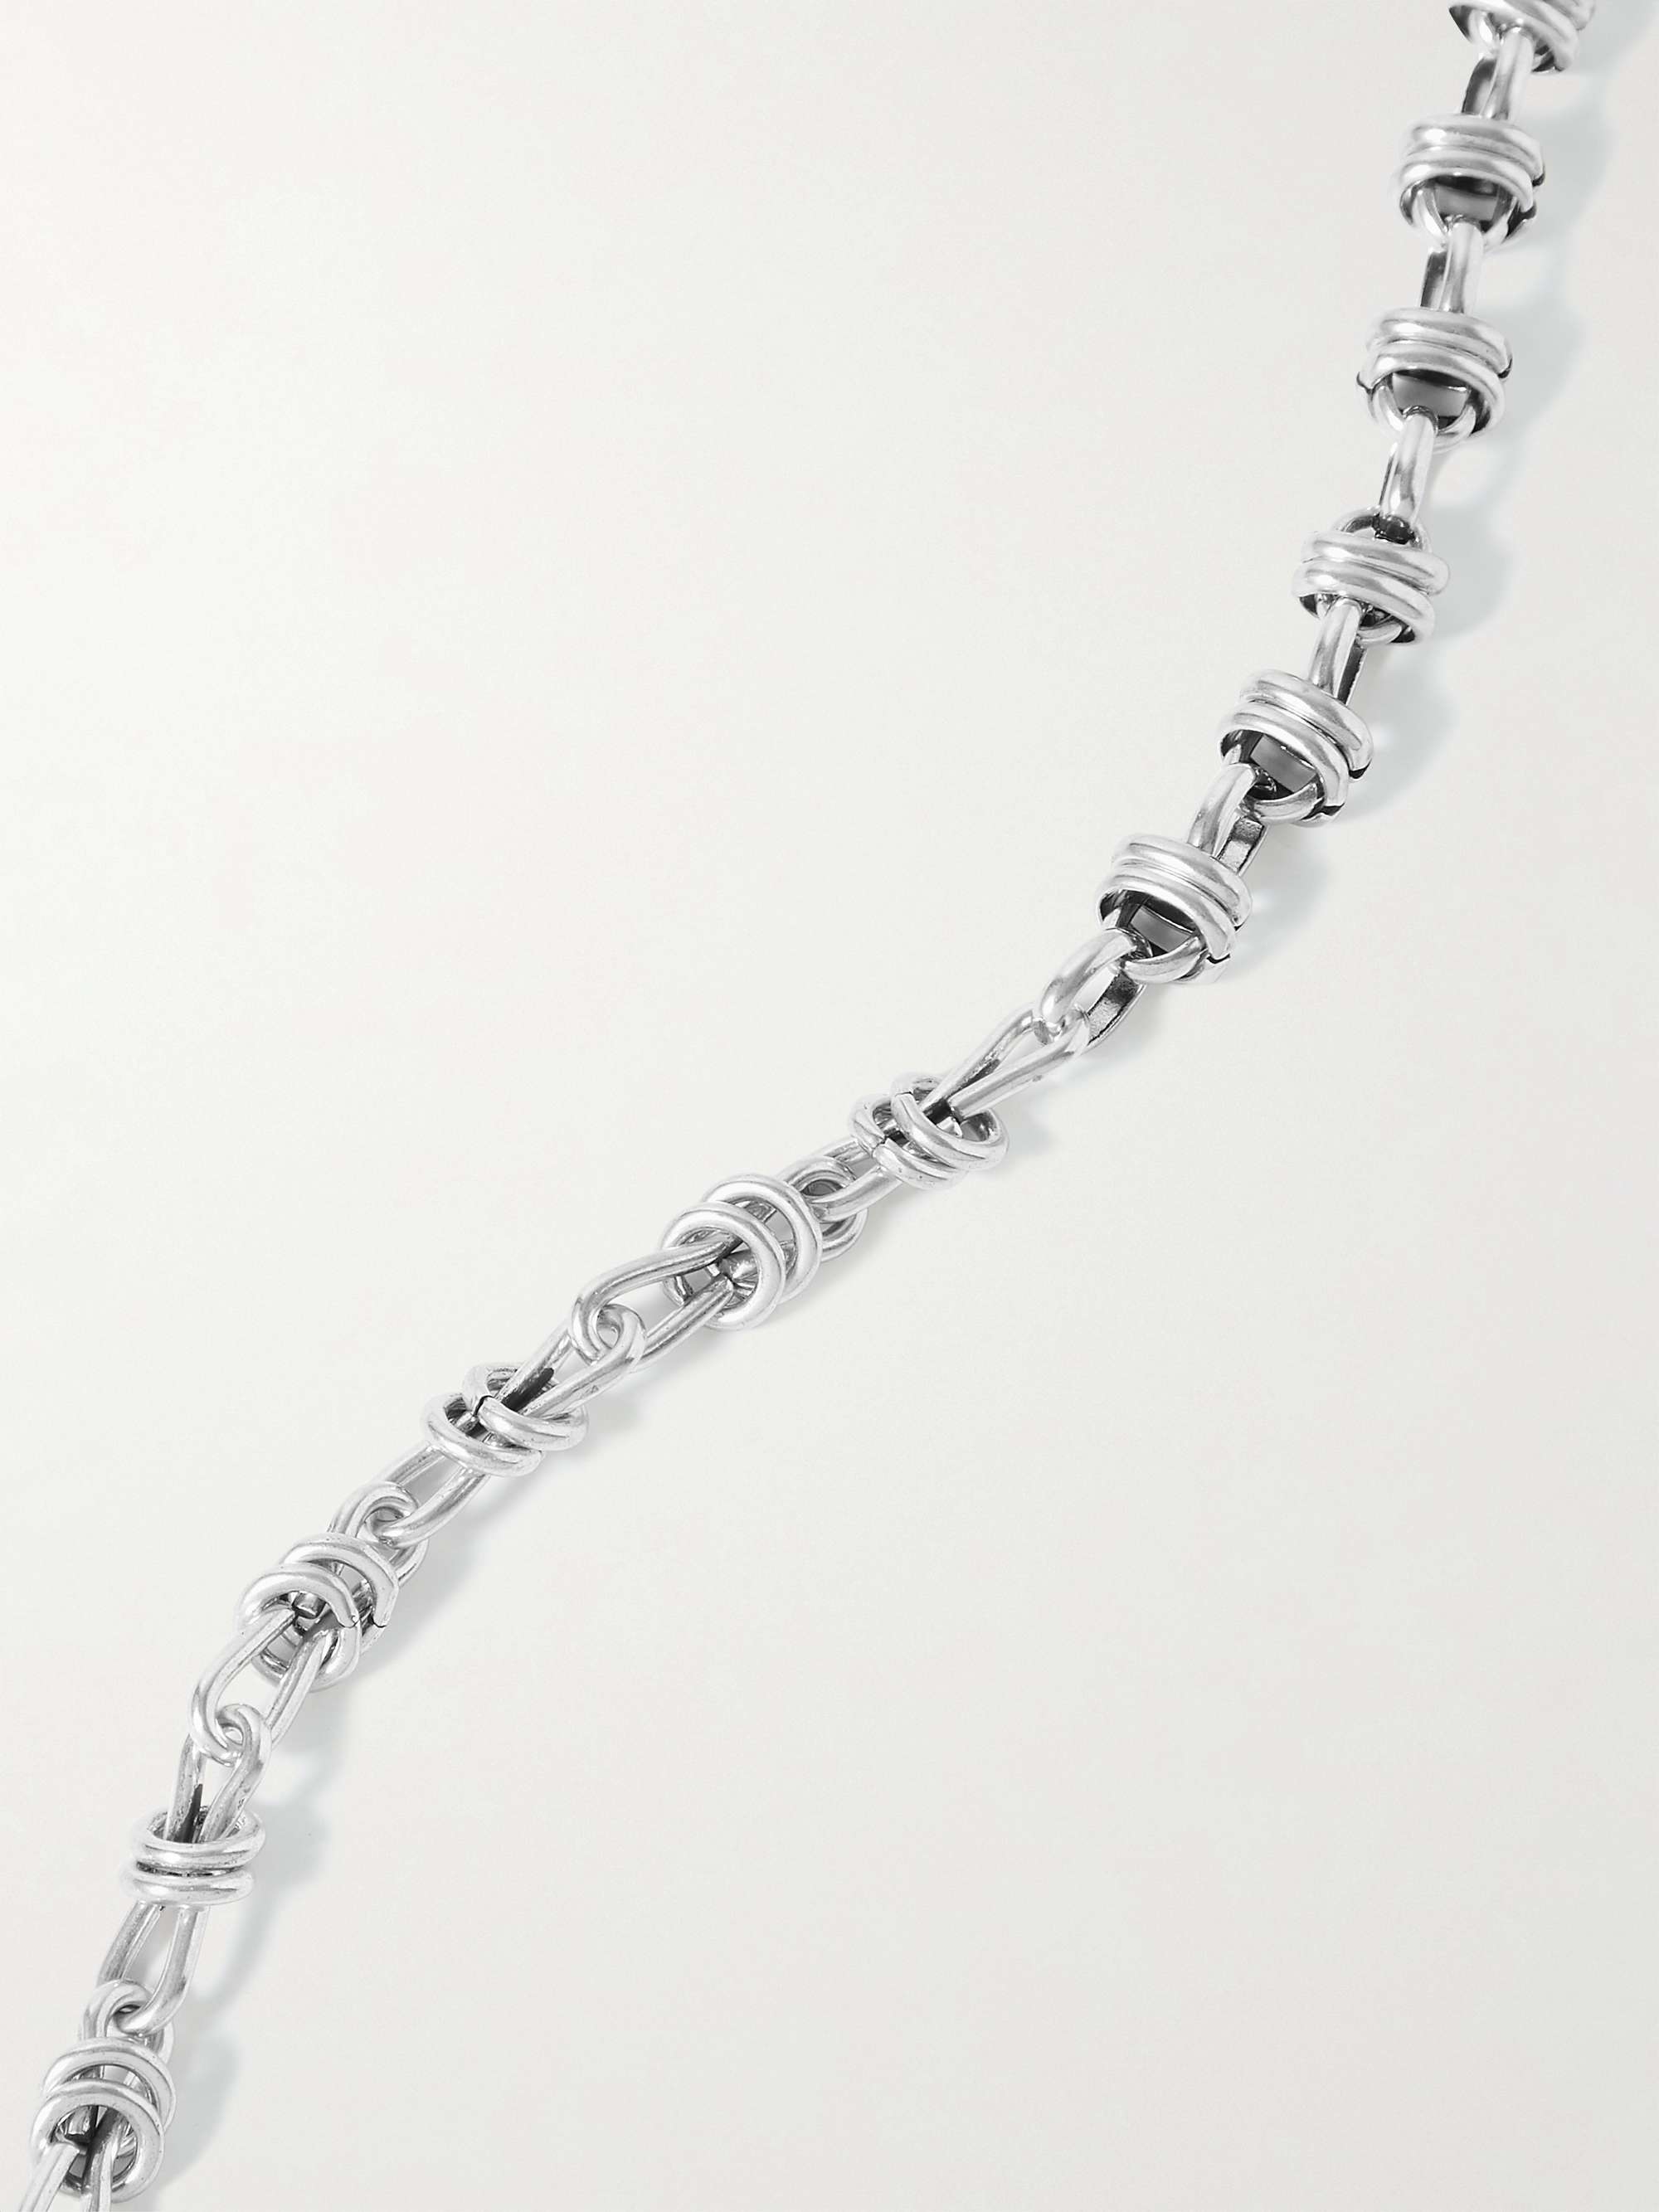 ISABEL MARANT So Serious Silver-Tone Chain Necklace | MR PORTER